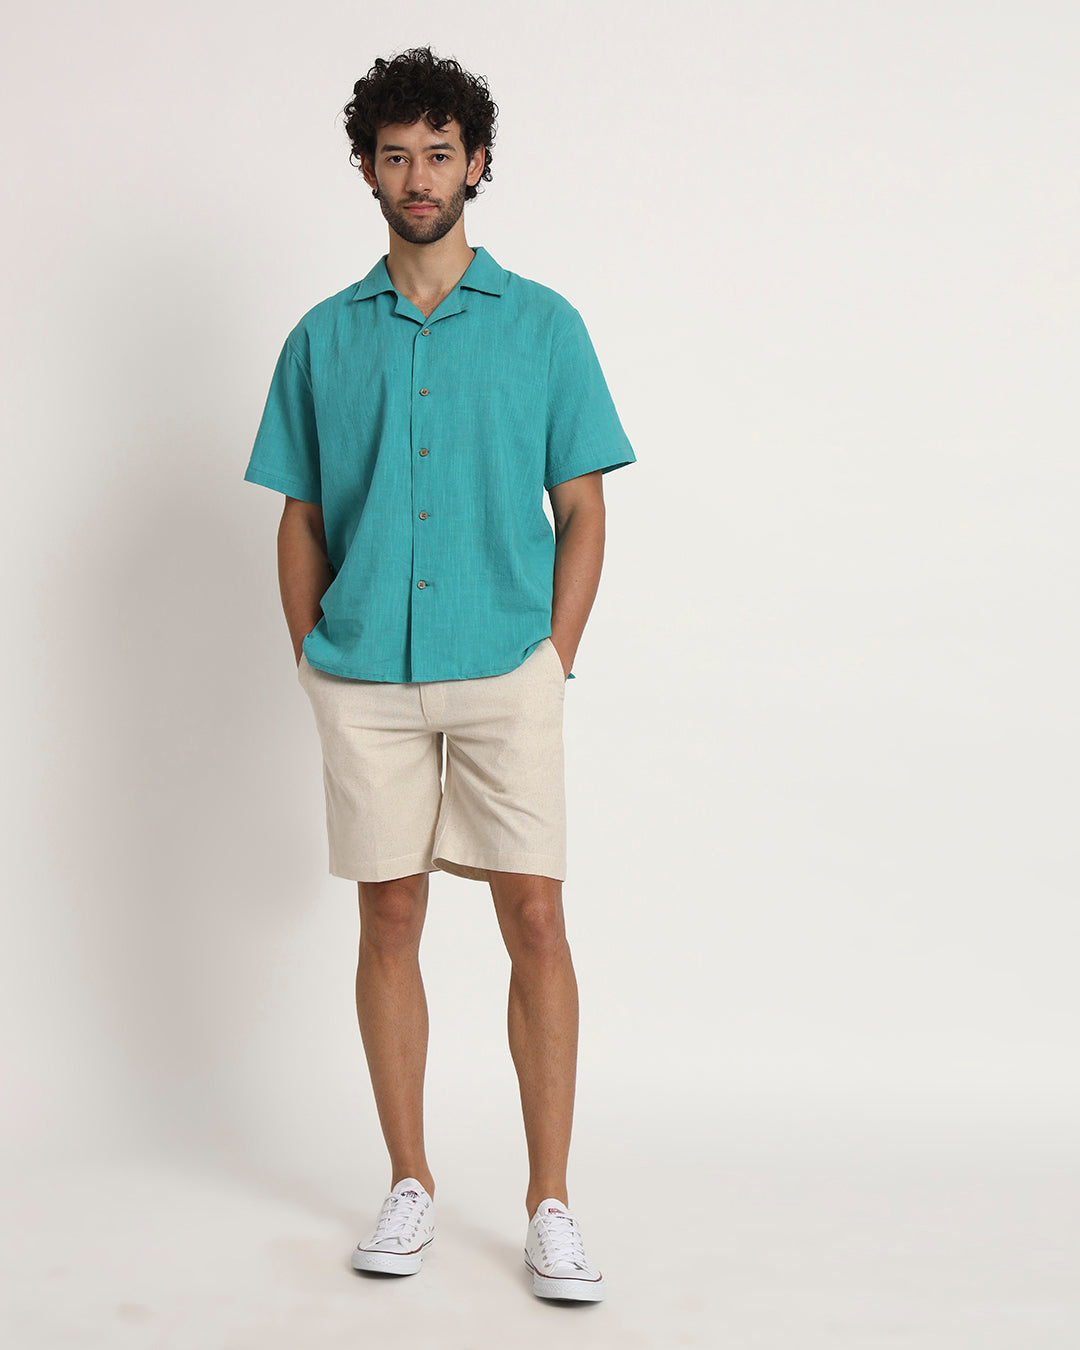 Ready For Anything Beige Men's Shorts